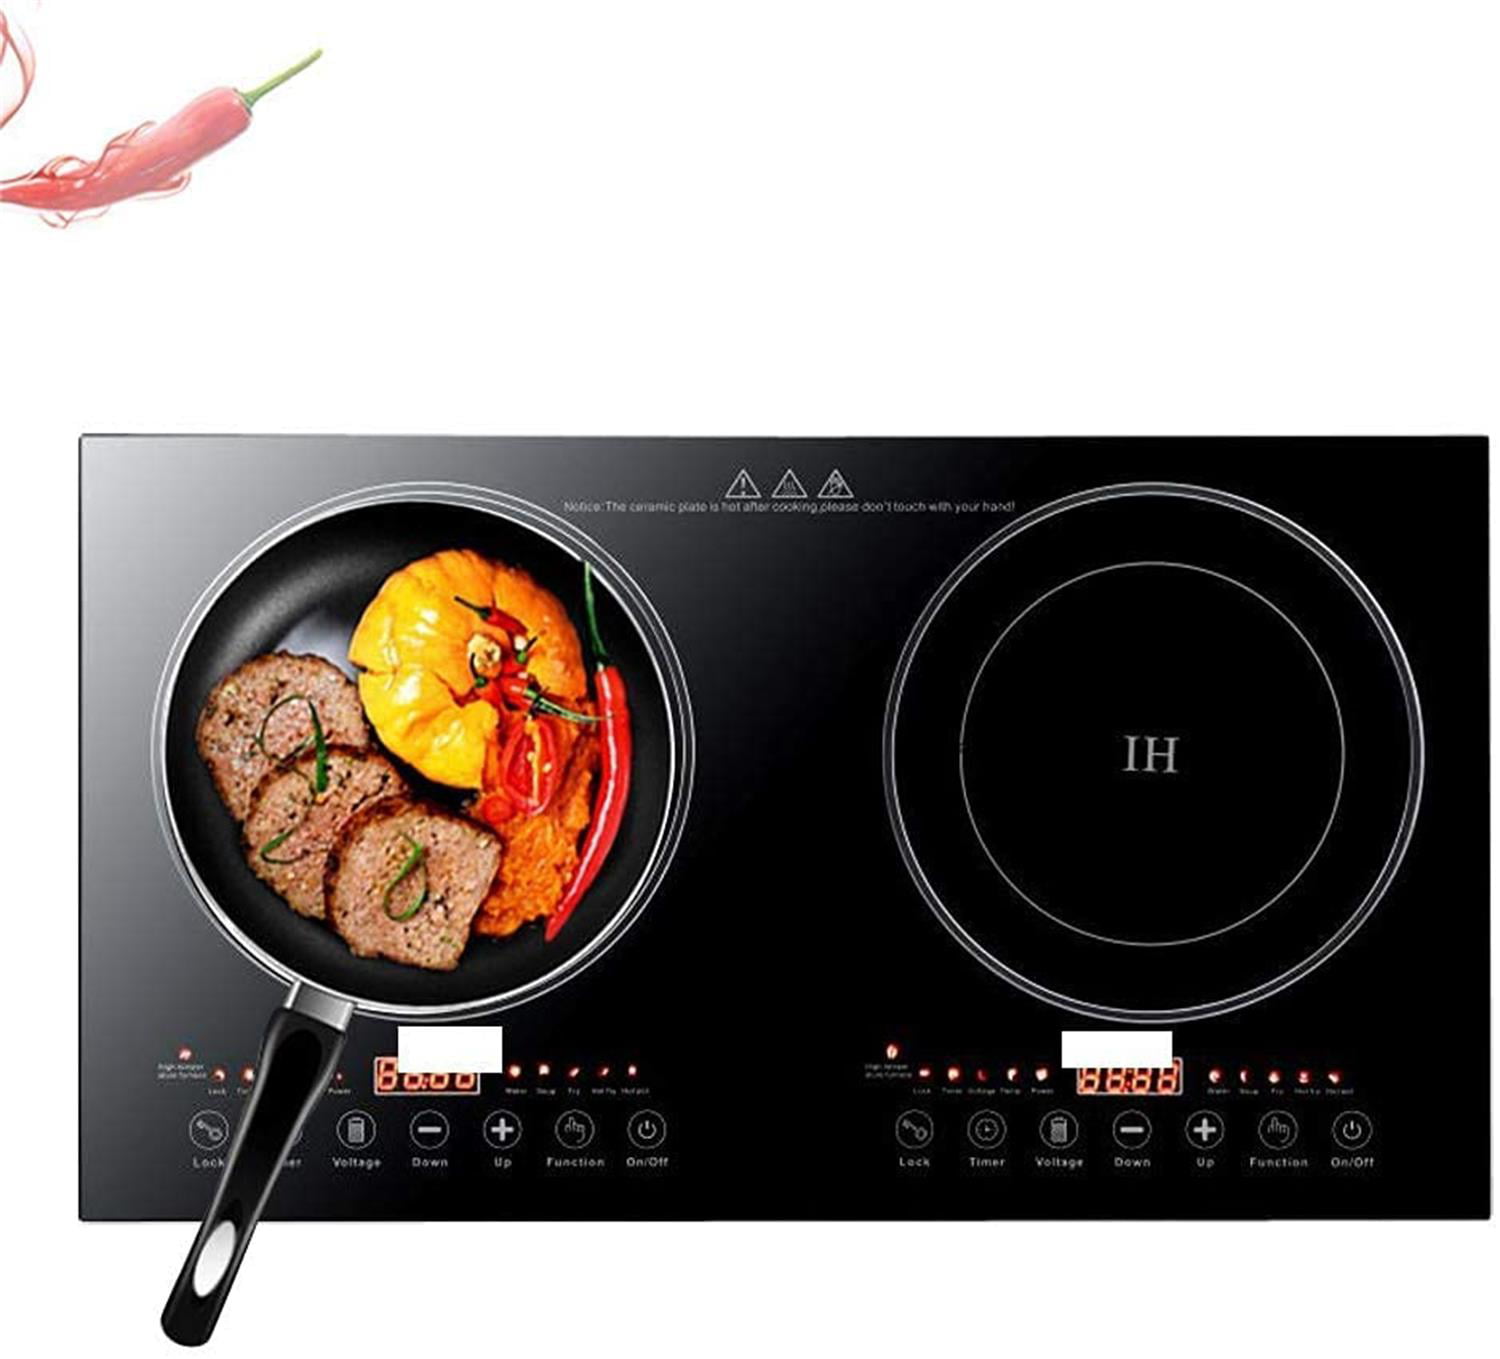 Details about   110V Electric 2 Digital Dual Countertop Burner Work with Iron Pan 2400 Watt 